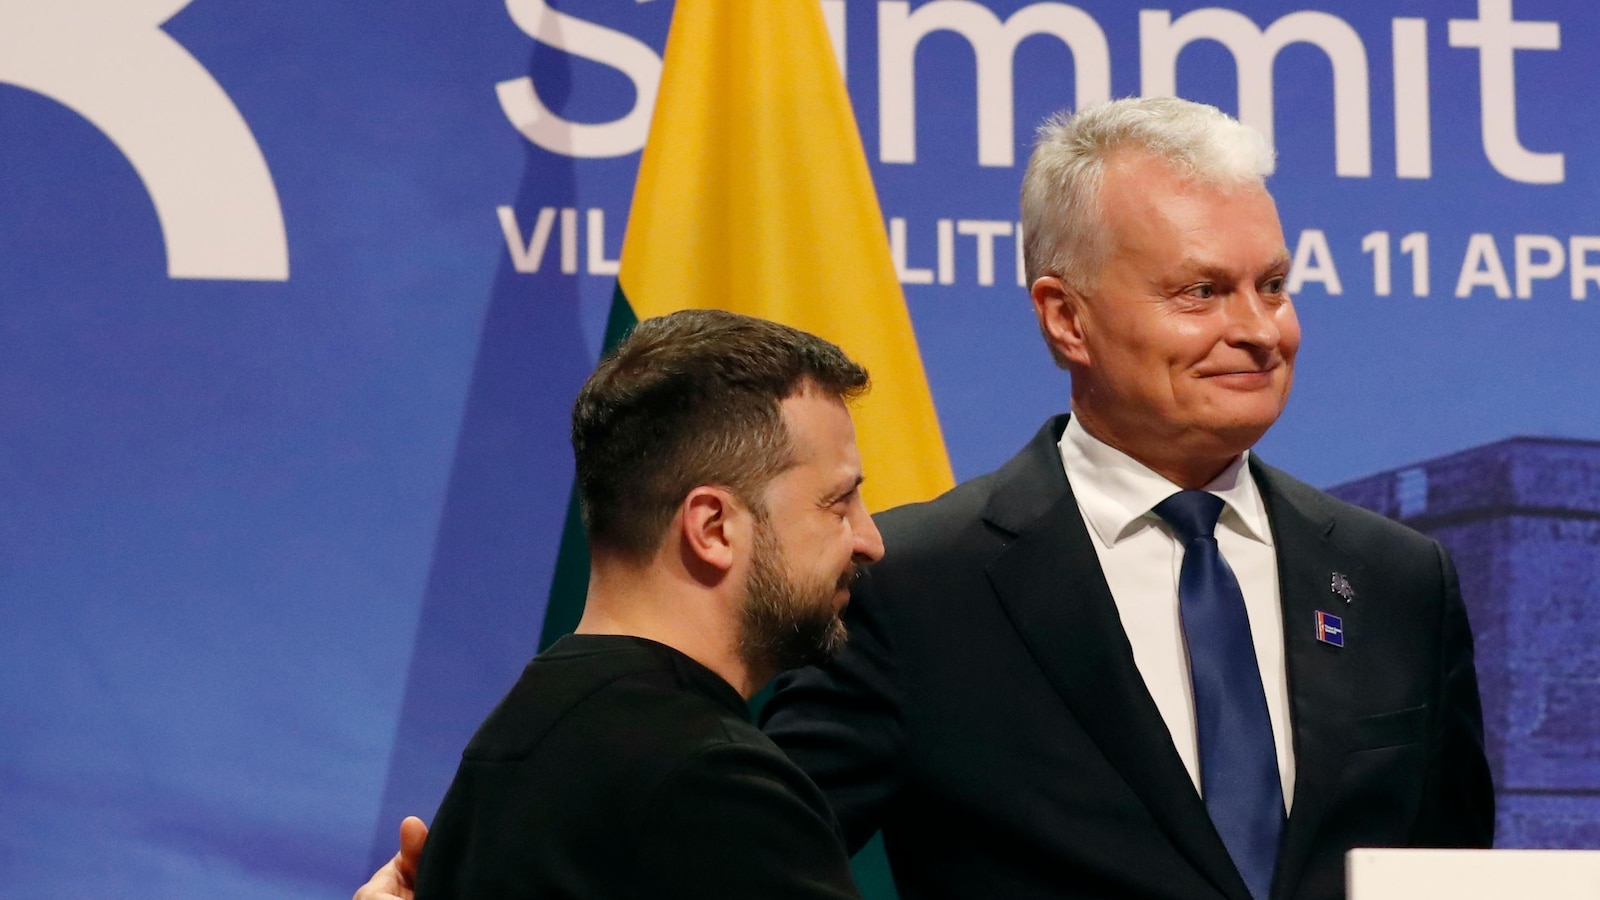 Lithuania holds a presidential vote as concerns grow in the Baltic states over Russia and the war in Ukraine